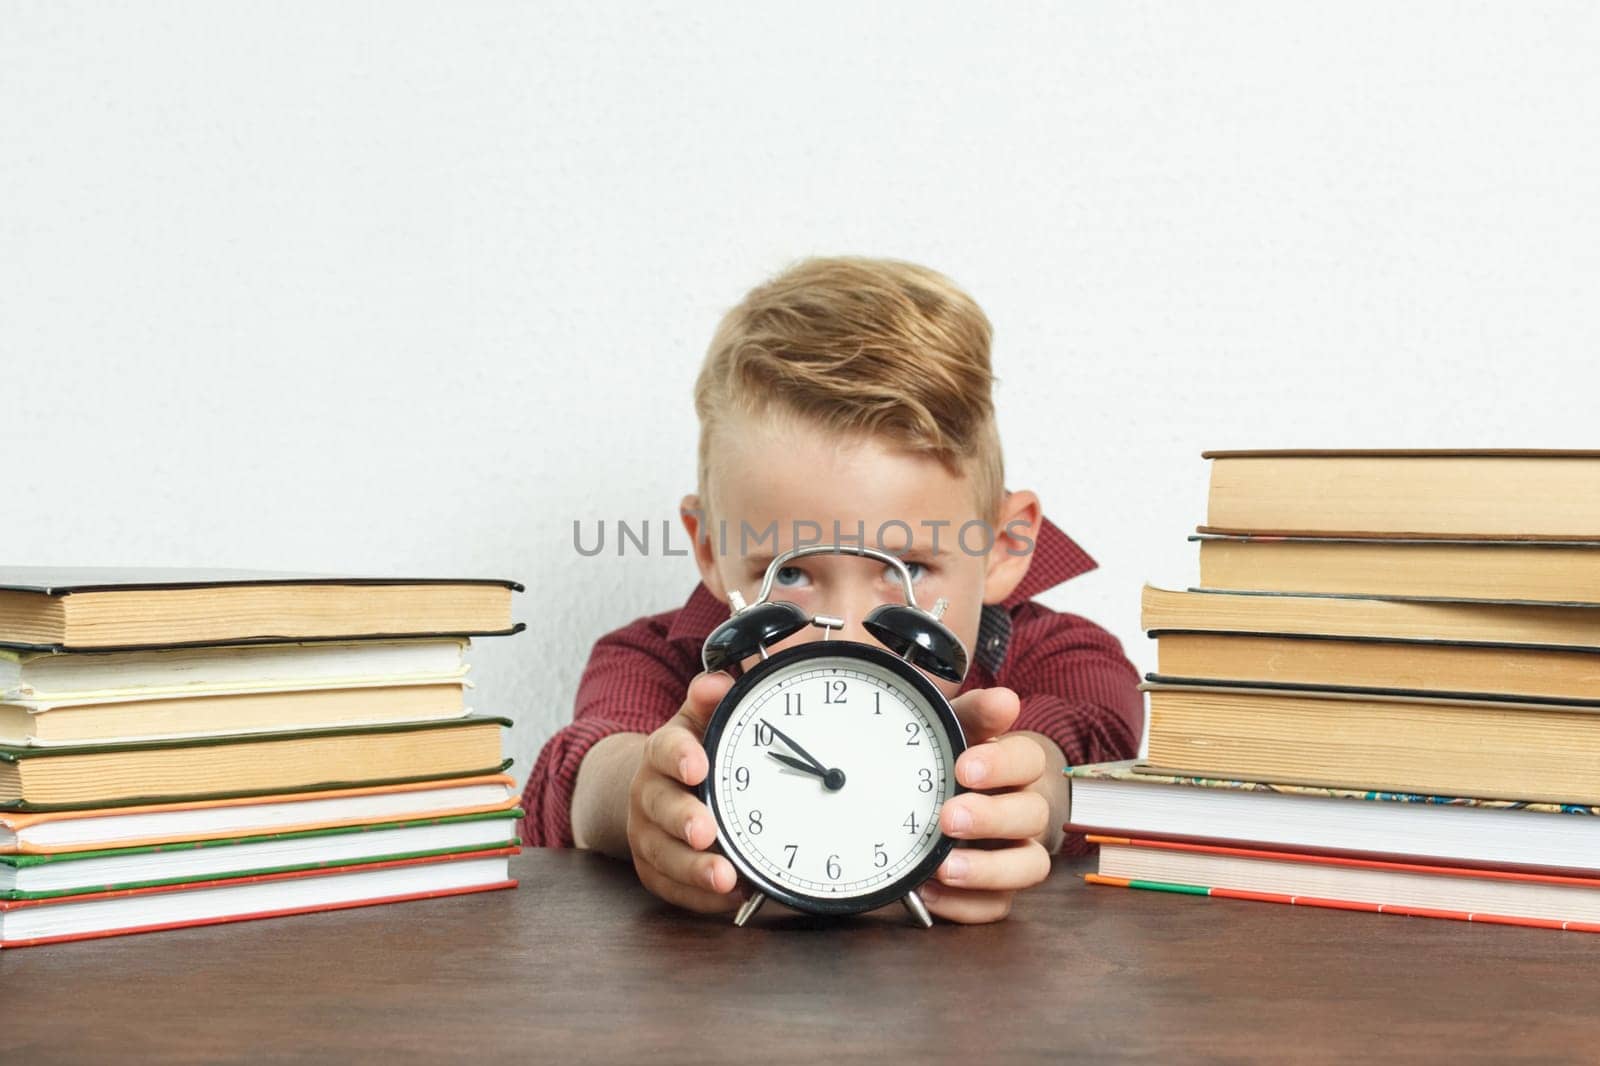 The schoolboy sits at the table and holds an alarm clock in his hands. Sharpness of the image on the alarm clock by Sd28DimoN_1976